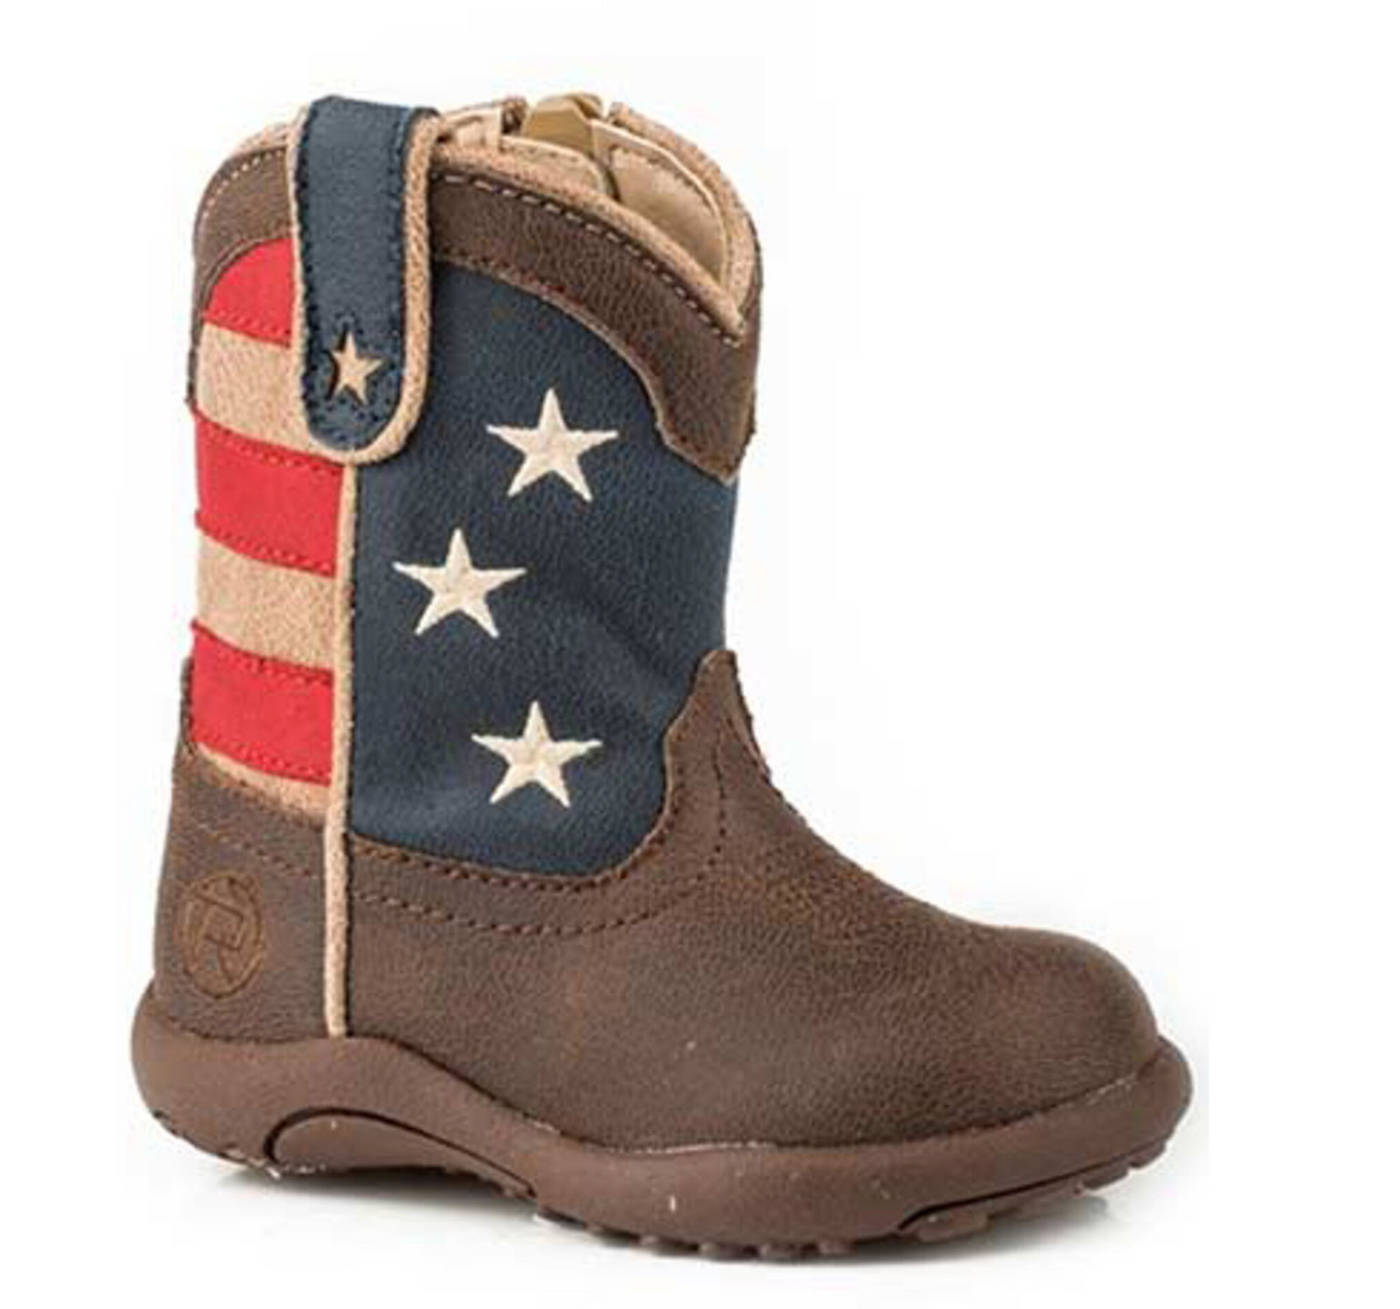 Toddler Square Toe Americana Boots